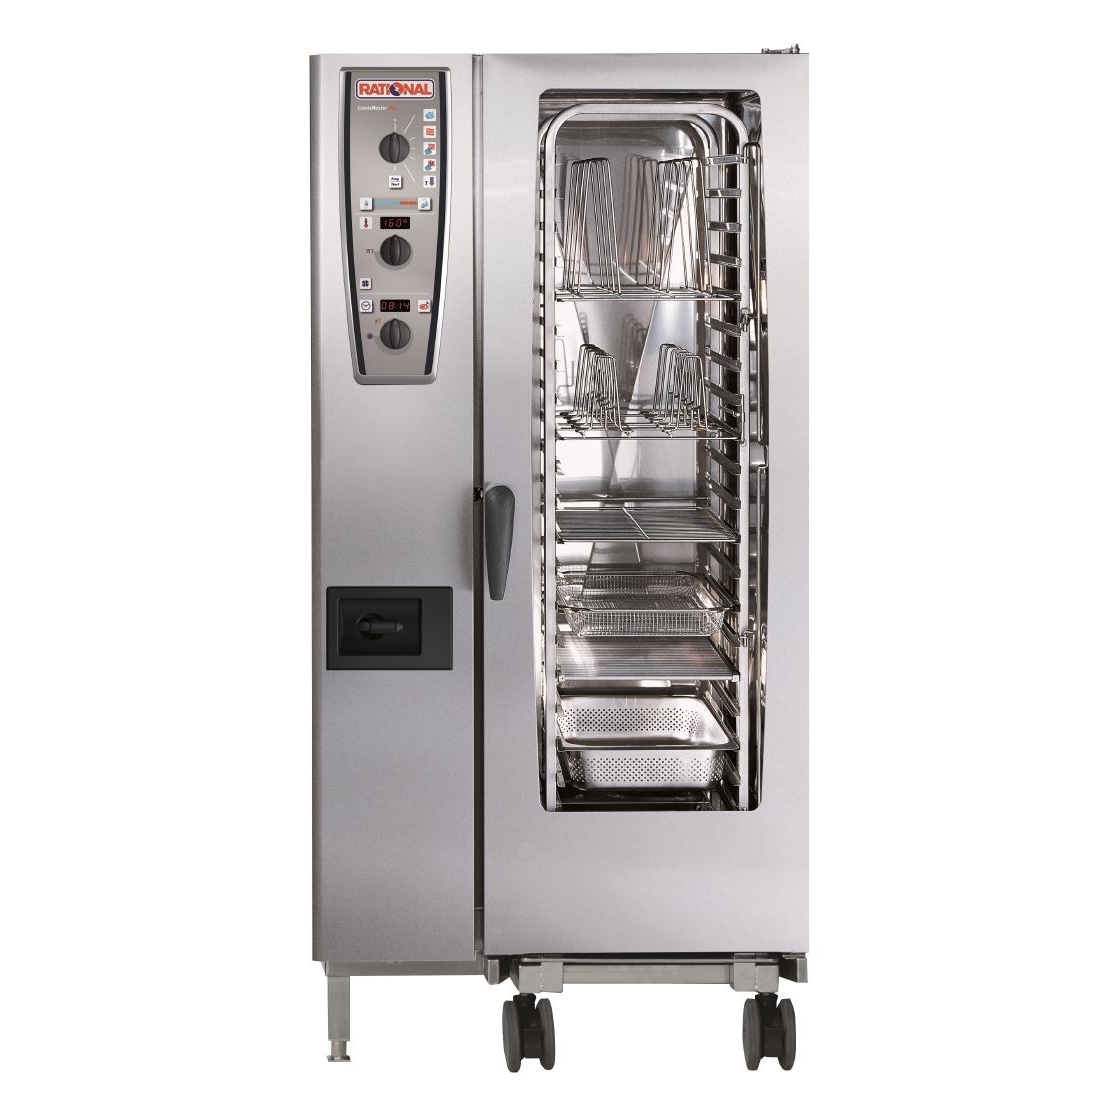 Rational Combimaster Plus Oven 202 Natural Gas